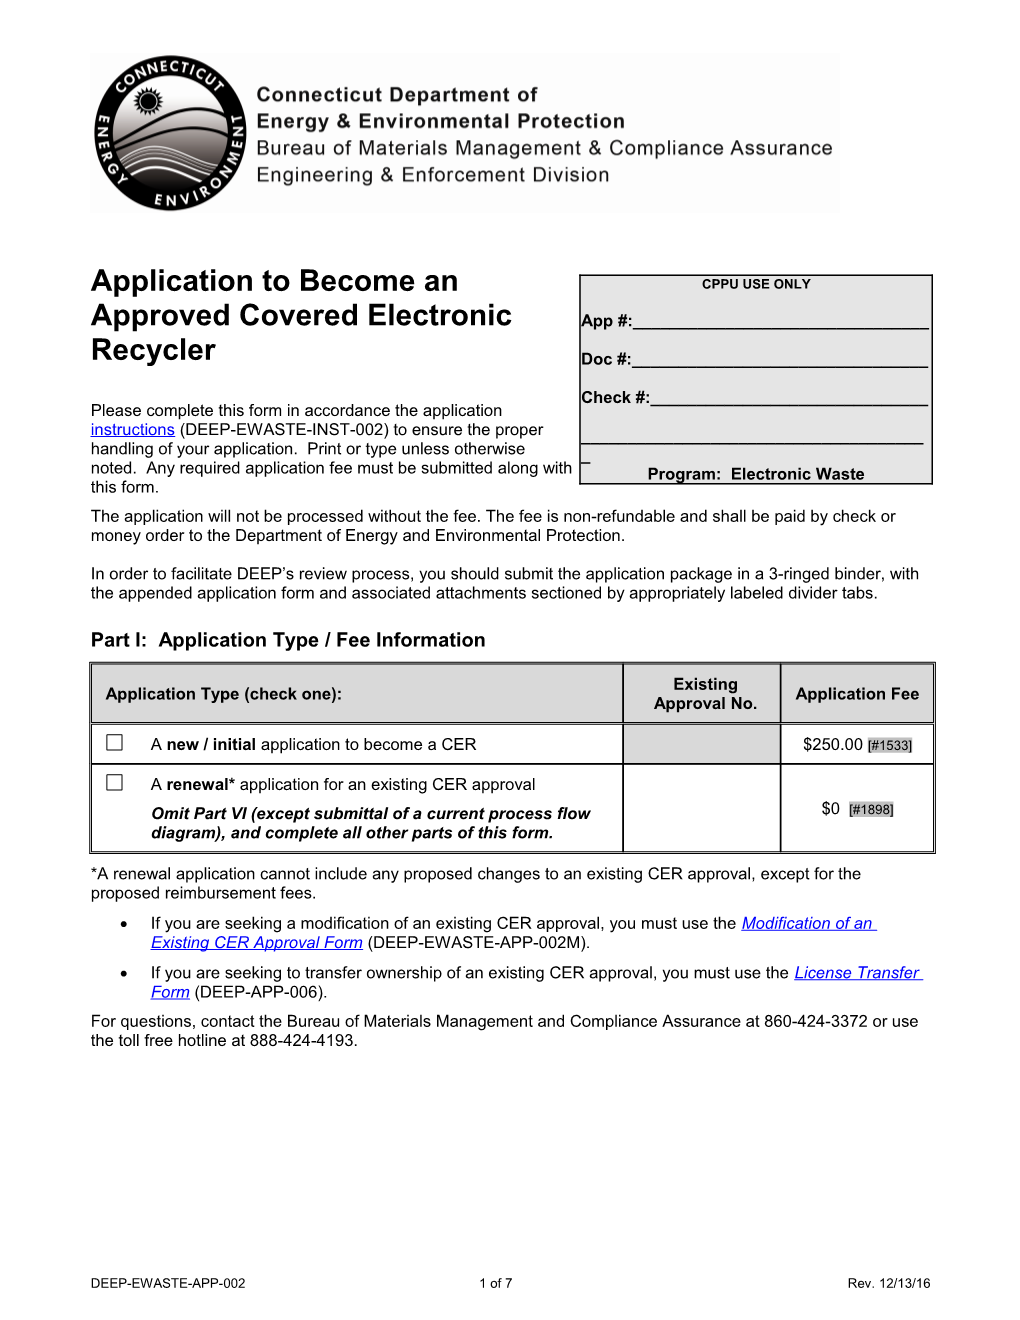 Application to Become an Approved Covered Electronic Recycler